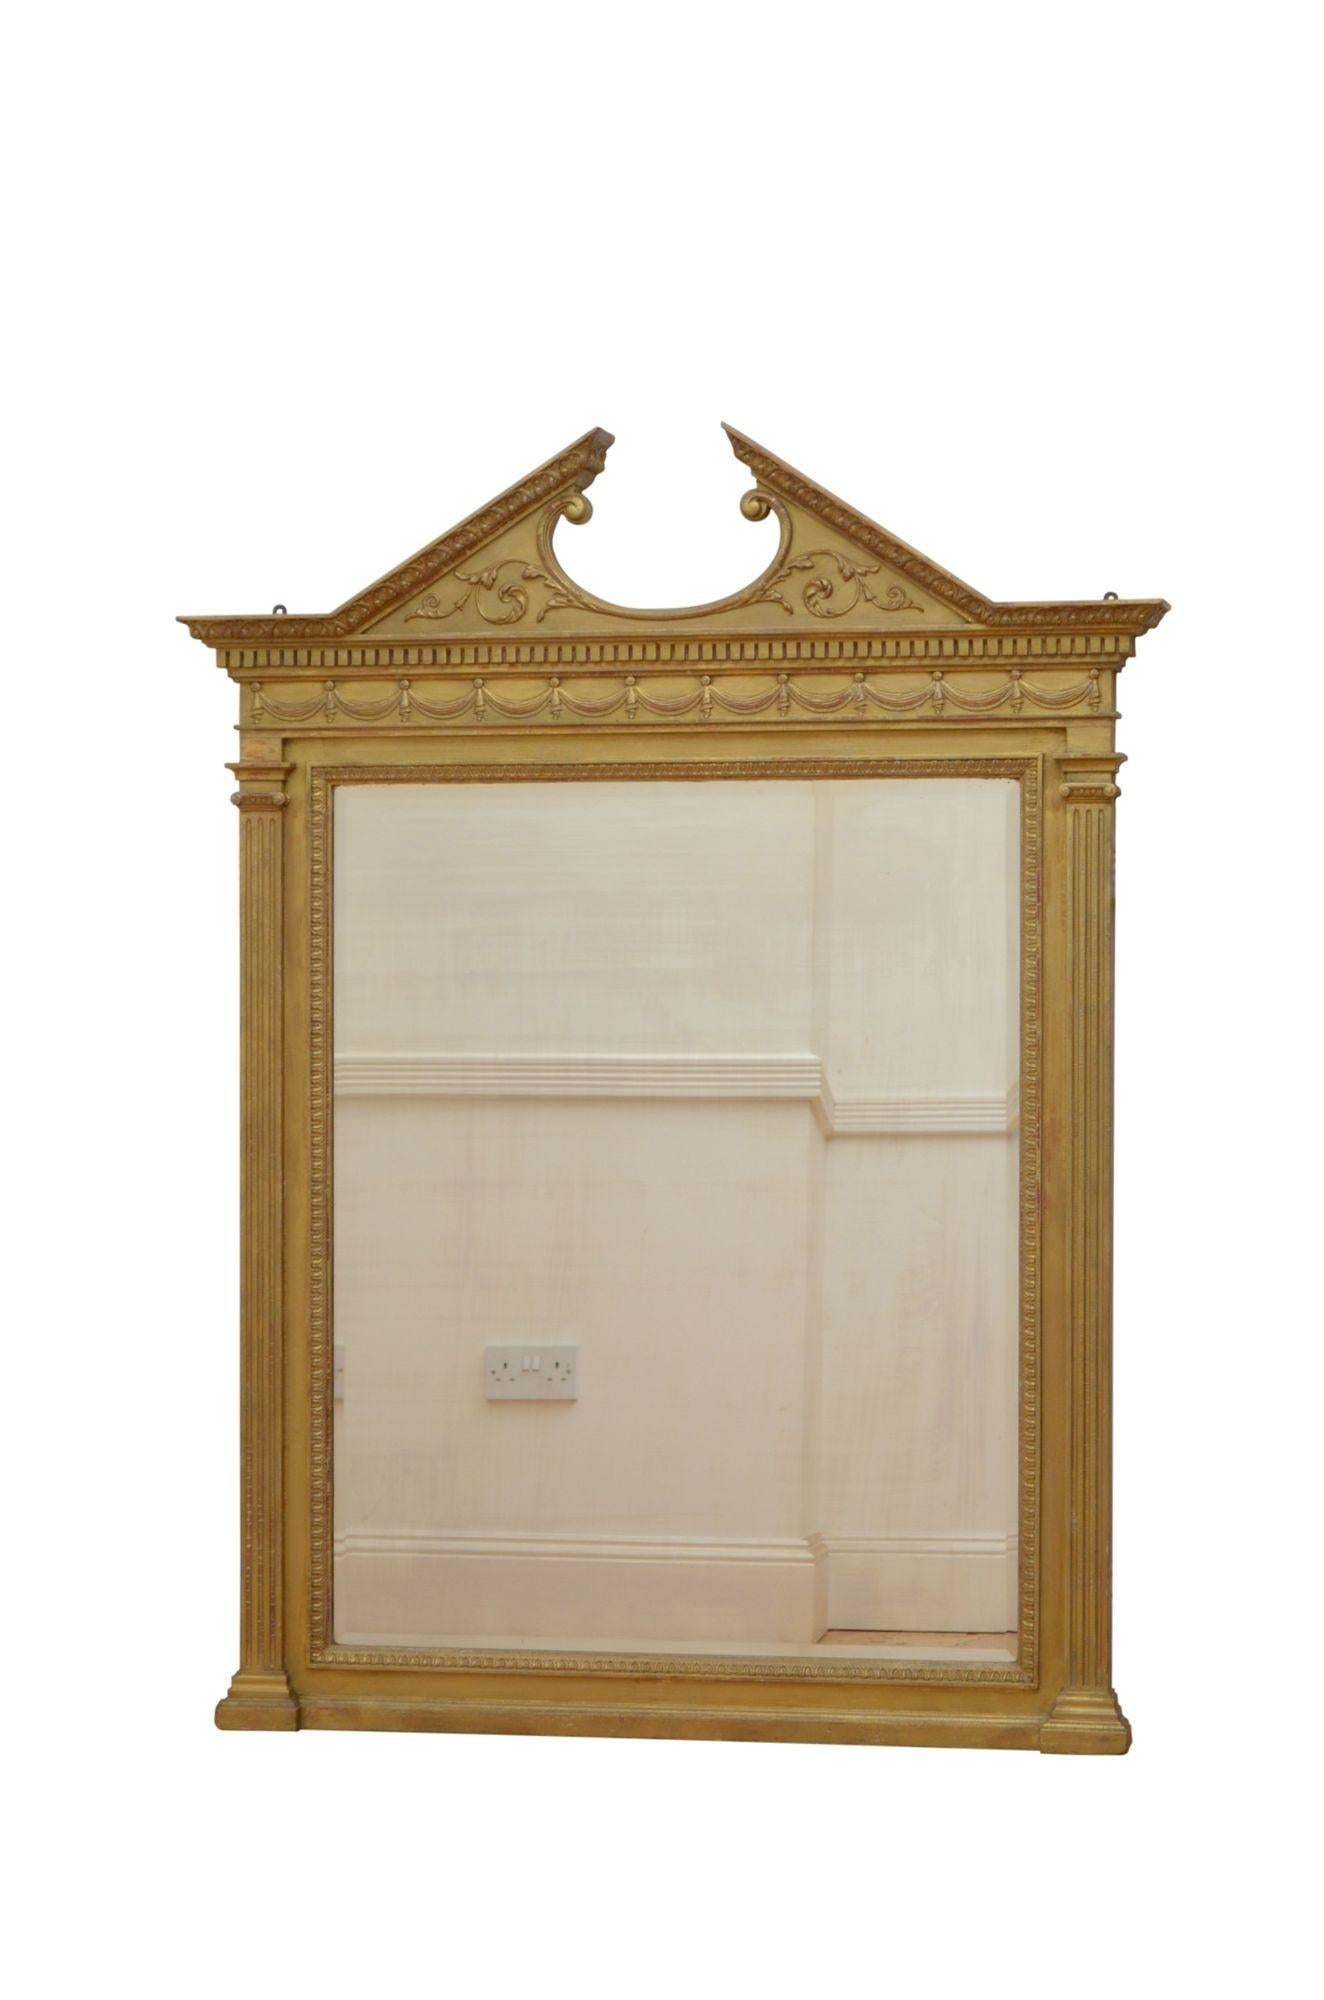 P0270 A Victorian gold wall mirror, having architectural pediment with acanthus leaf carved moulding, scrolls and dentil cornice above swag carved frieze and original bevelled edge mirror with some foxing flanked by reeded columns with carved